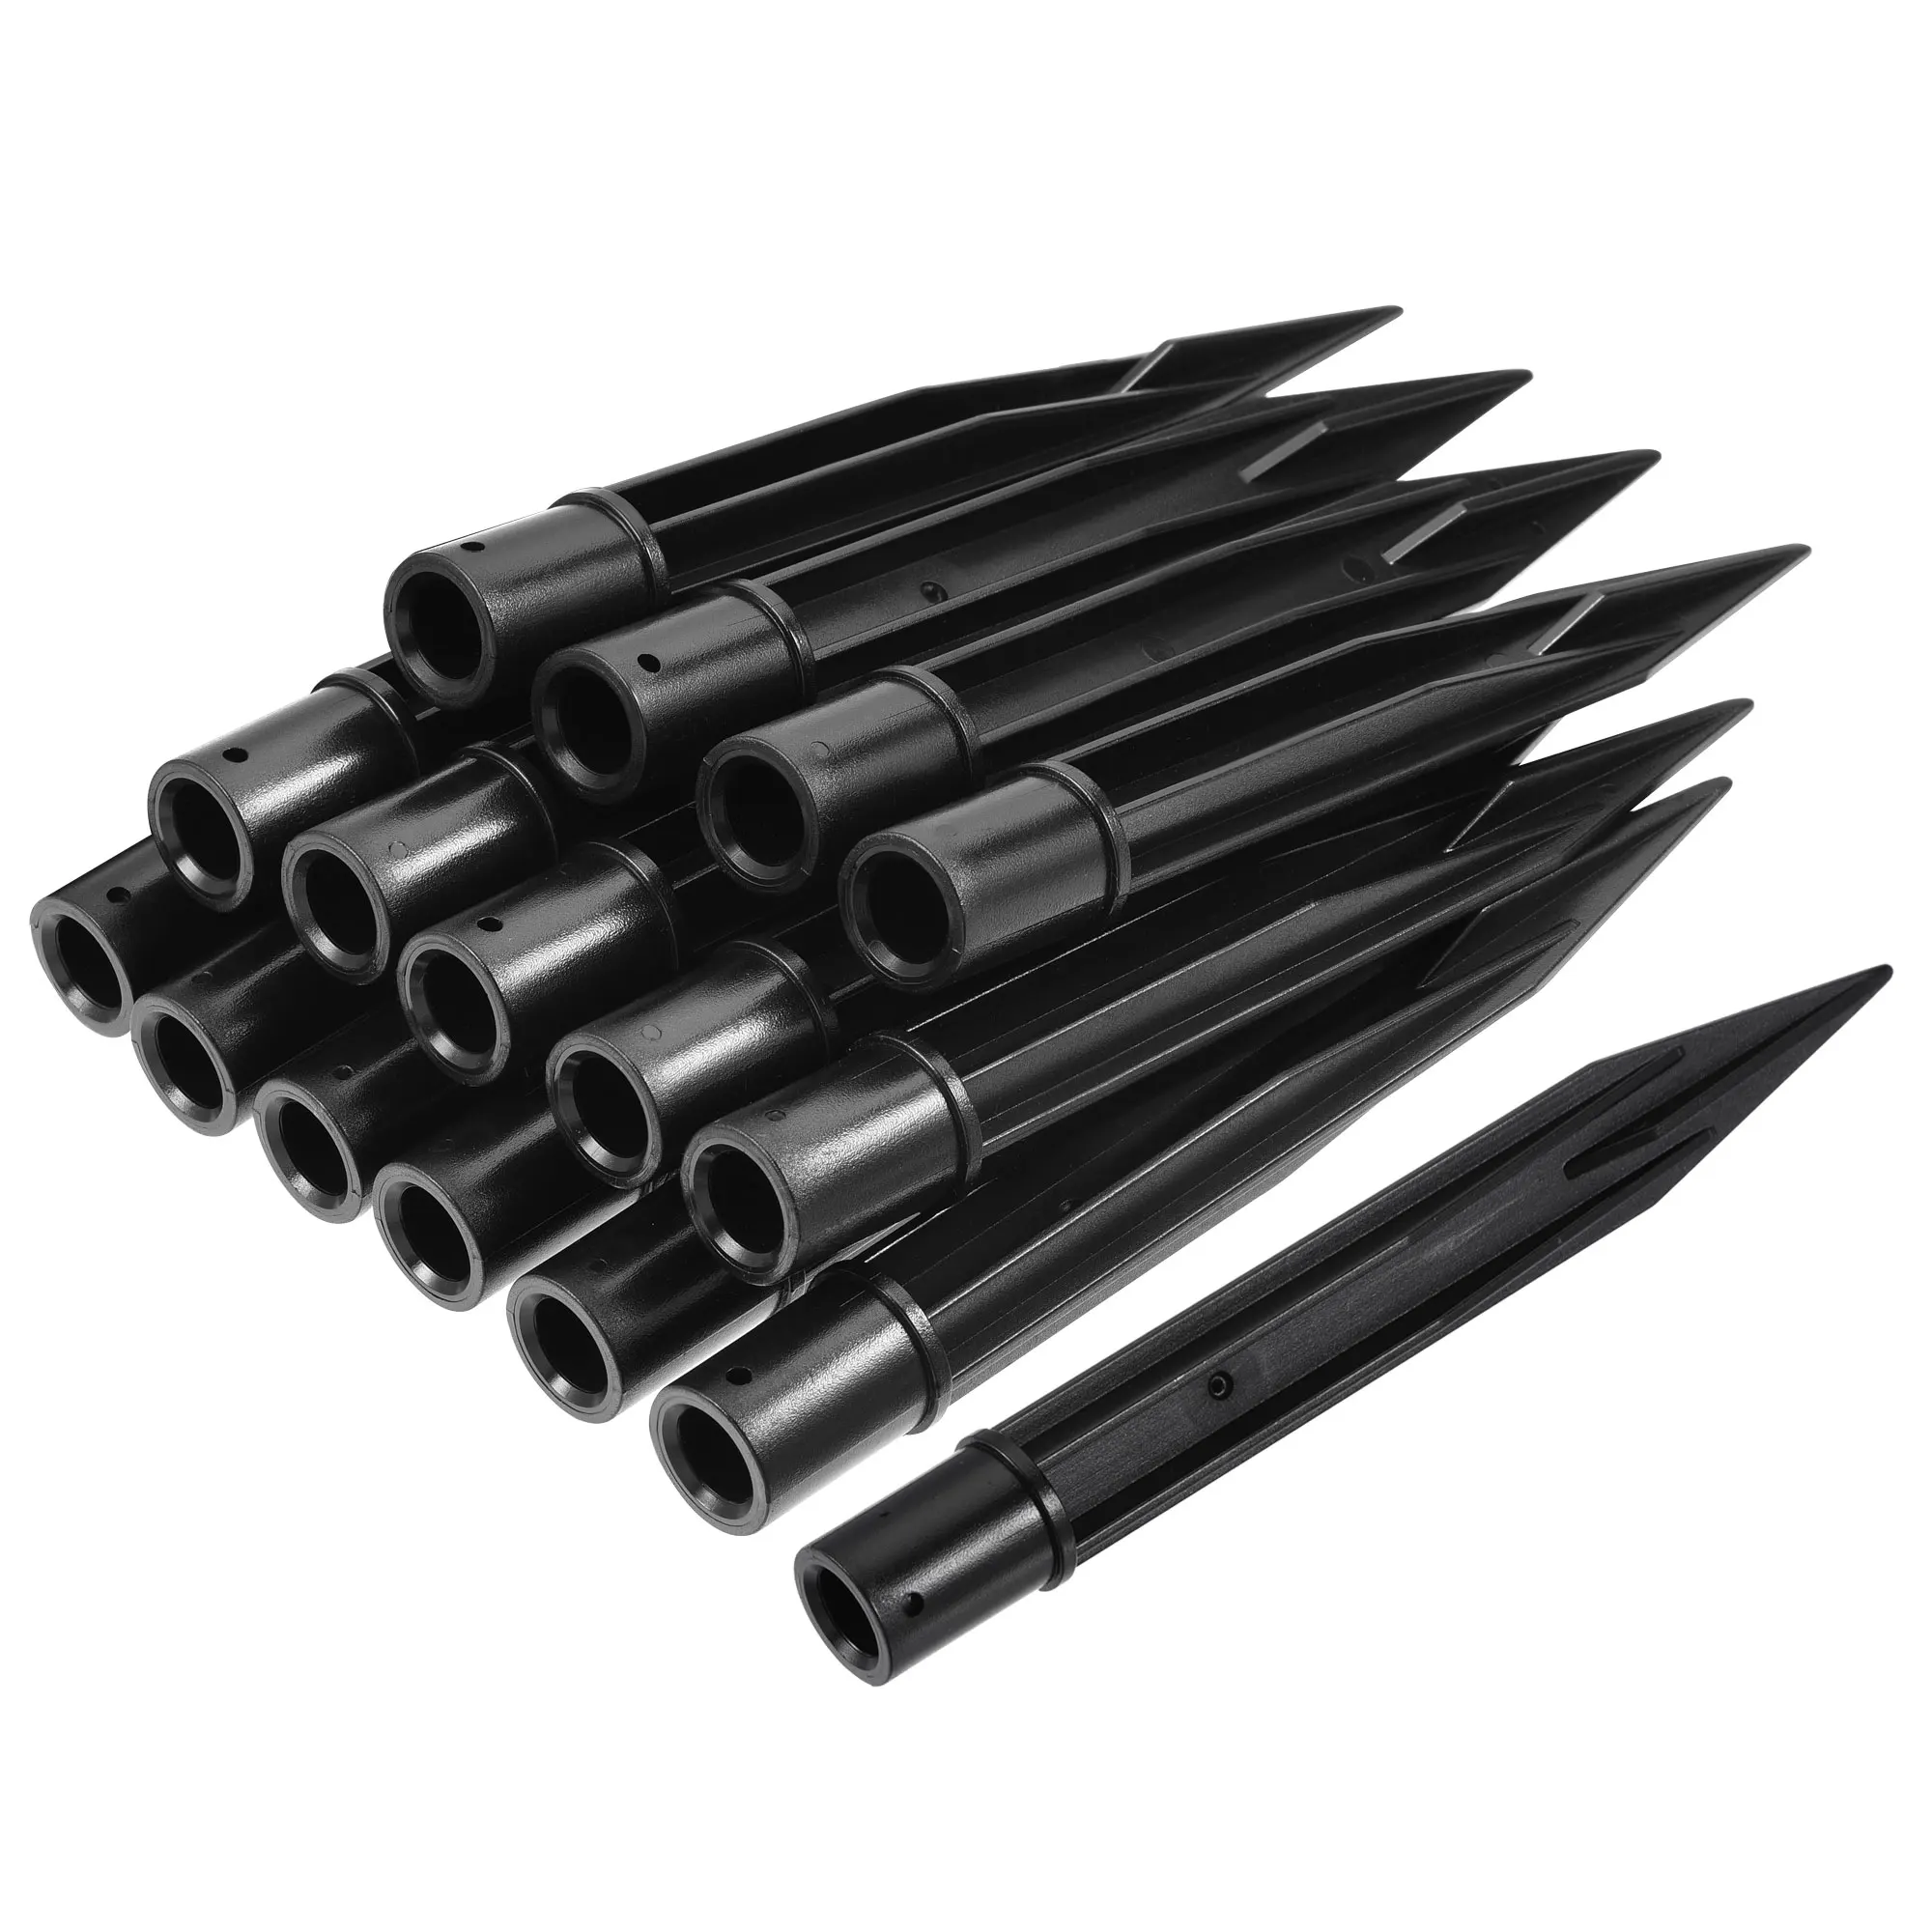 8/12/16Pcs Ground Spike 10x17x150mm Solar Light Spikes ABS Plastic Black Spikes Ground Stakes for Garden Pathway Landscape Lamps 100pcs 4x20cm landscape sod staples sturdy garden stakes weed barrier pin for garden